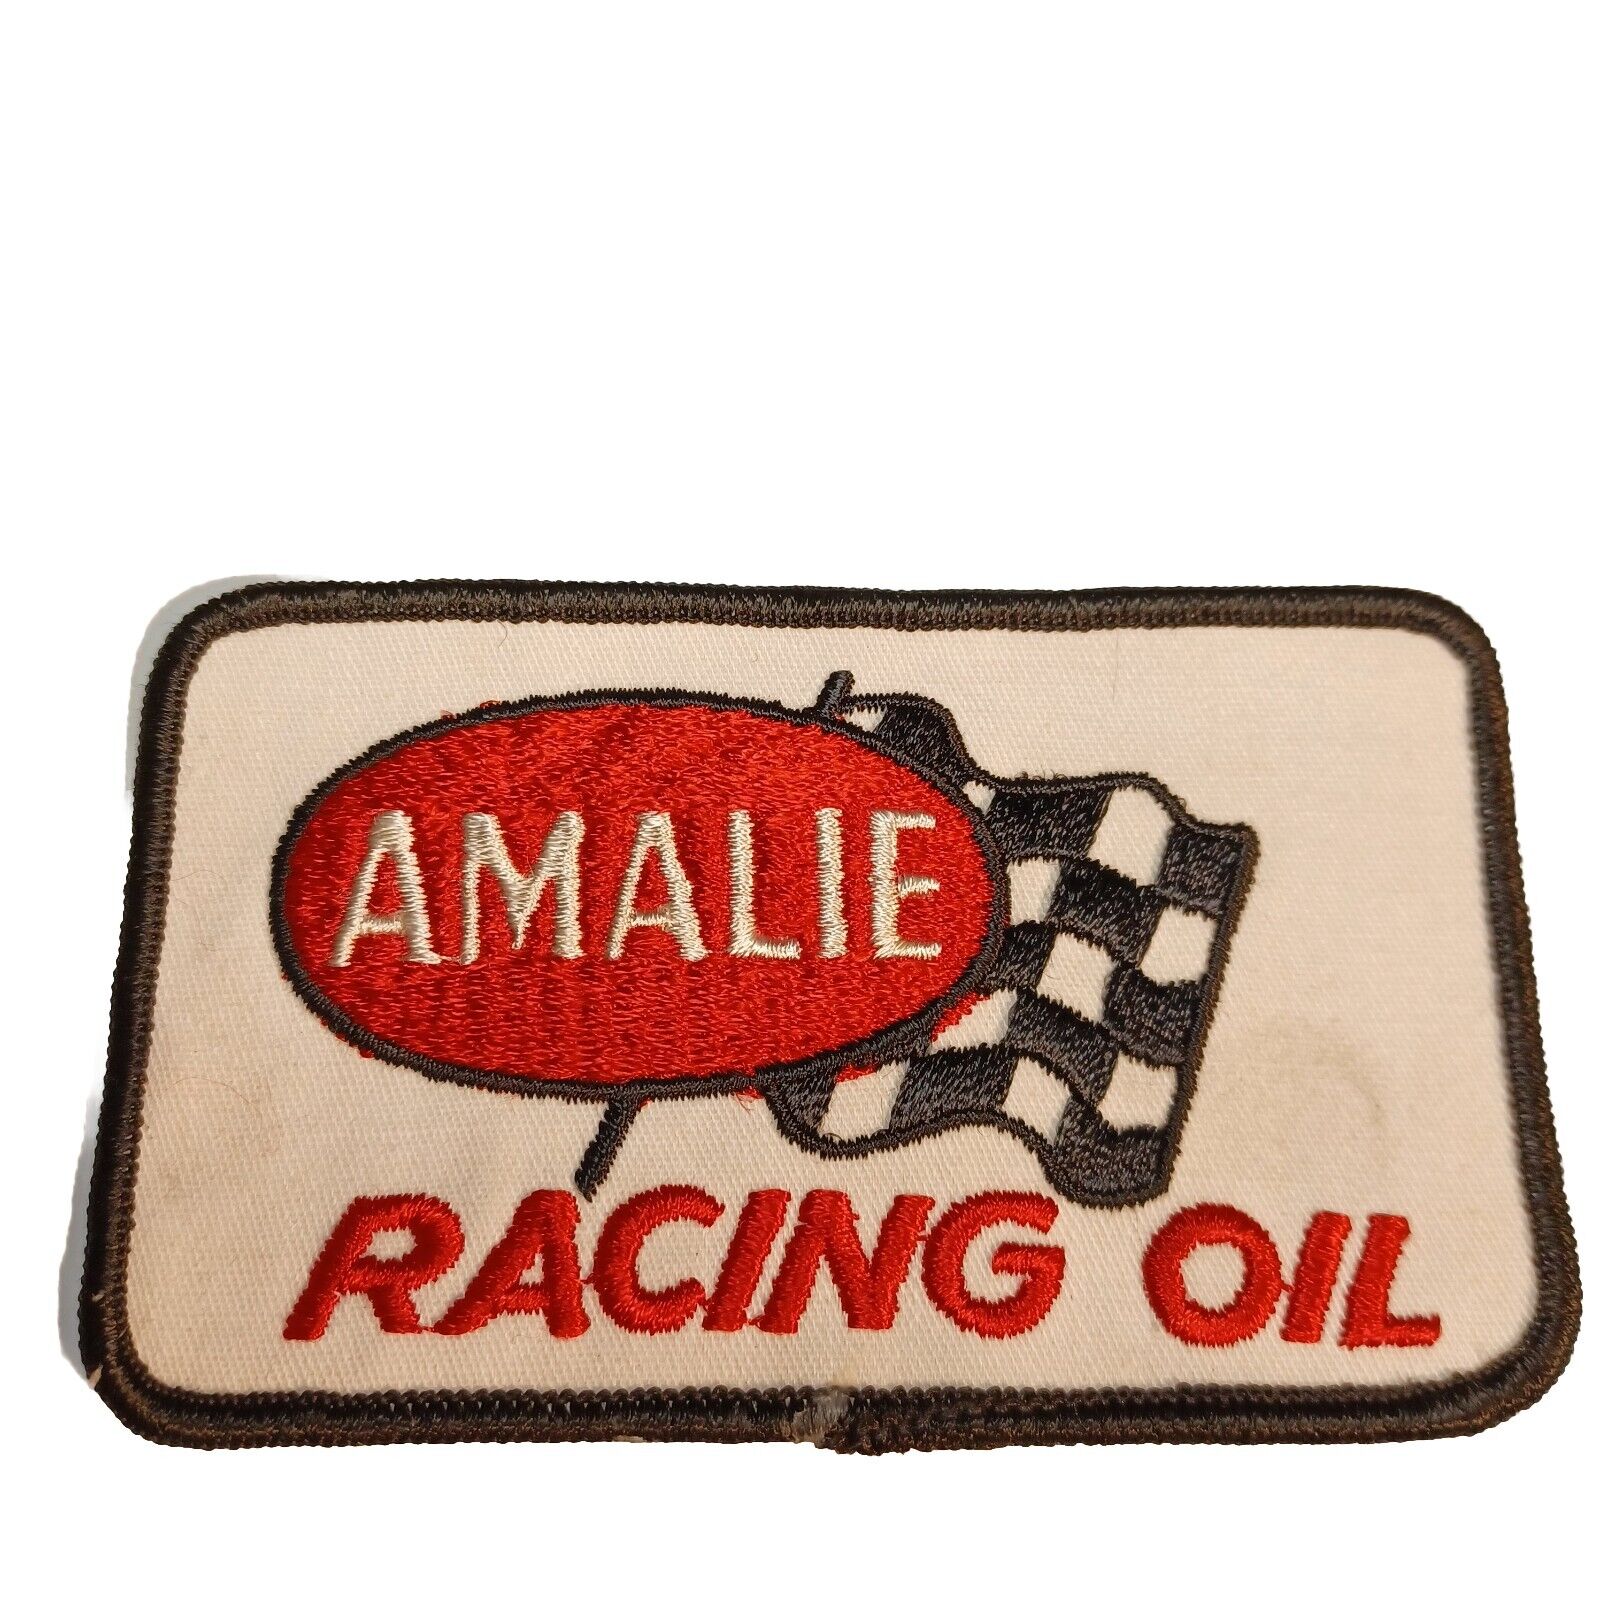 Vintage - Amalie Racing Oil Embroidered Patch Colors Are Brilliant And Vibrant 